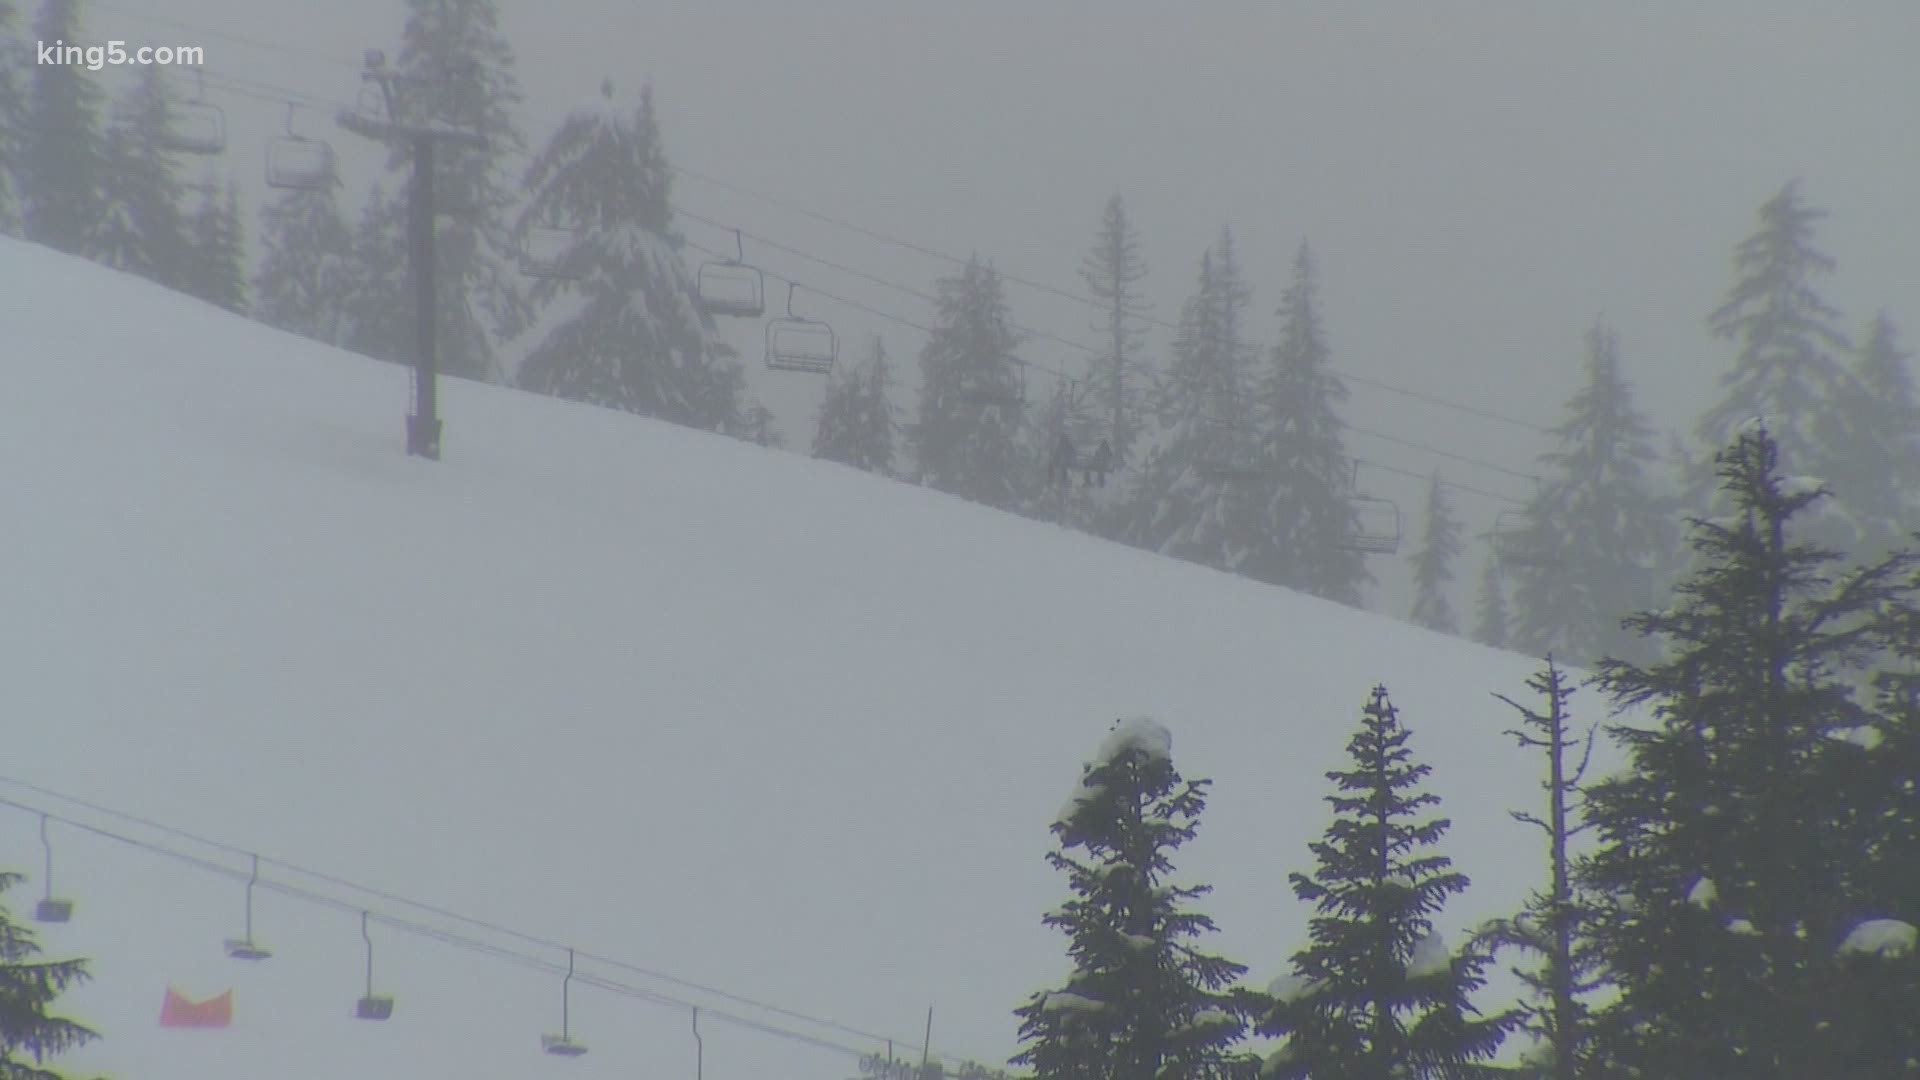 White Pass reopened Monday at 10 a.m. and Snoqualmie Pass reopened at noon. Stevens Pass reopened just before 2 p.m.